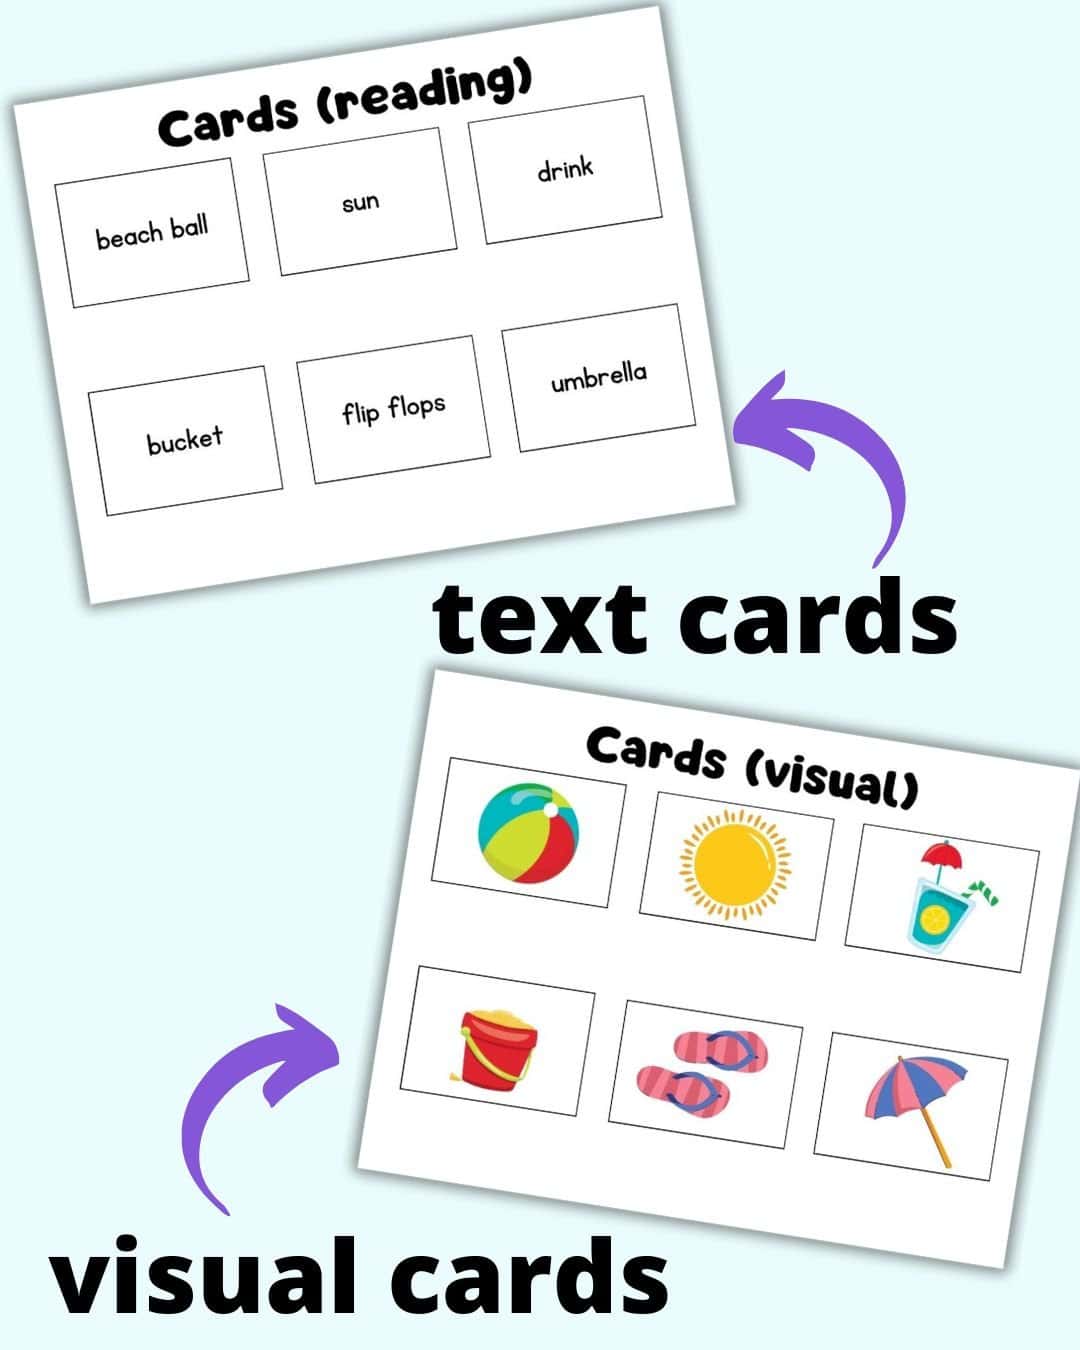 A preview of two pages of crds to cut out for a printable board game for kids. One has six summer related vocabulary words and the other has six images.